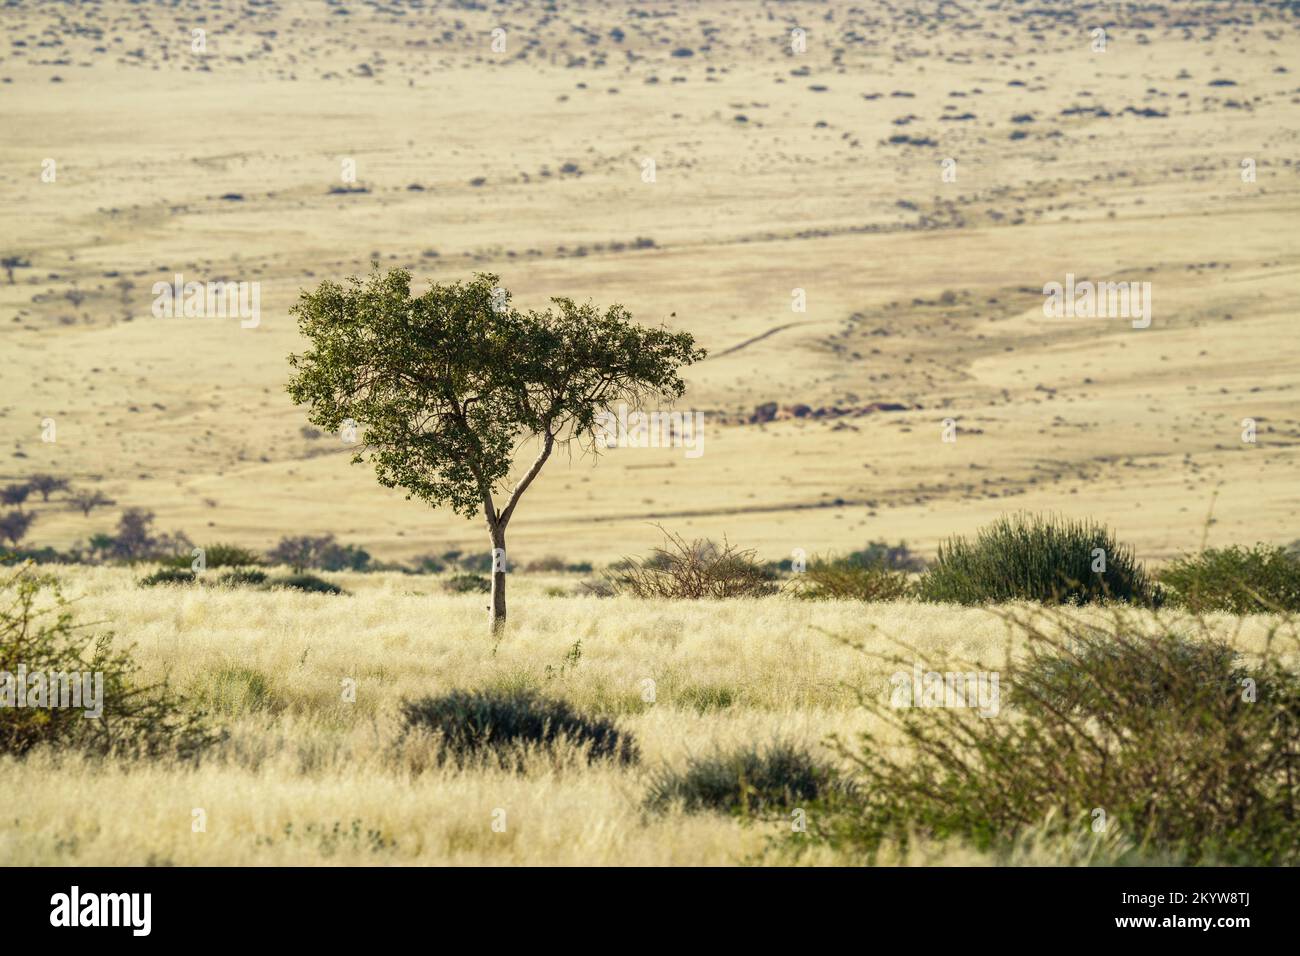 Acacia tree grows in the African savanna. Dry yellow grassland surrounds the tree. Damaraland, Namibia, Africa Stock Photo